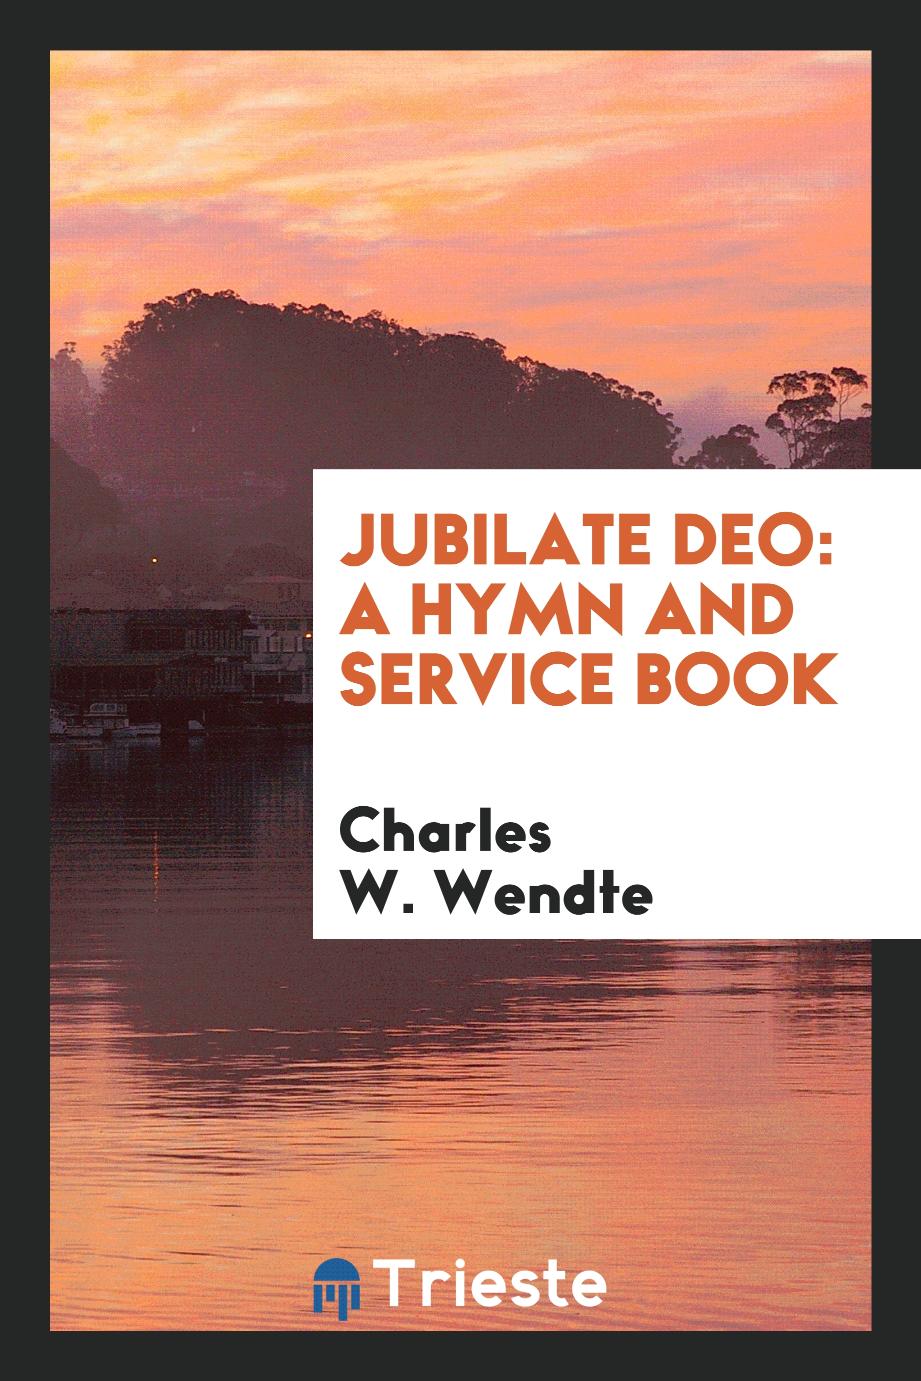 Jubilate Deo: A Hymn and Service Book